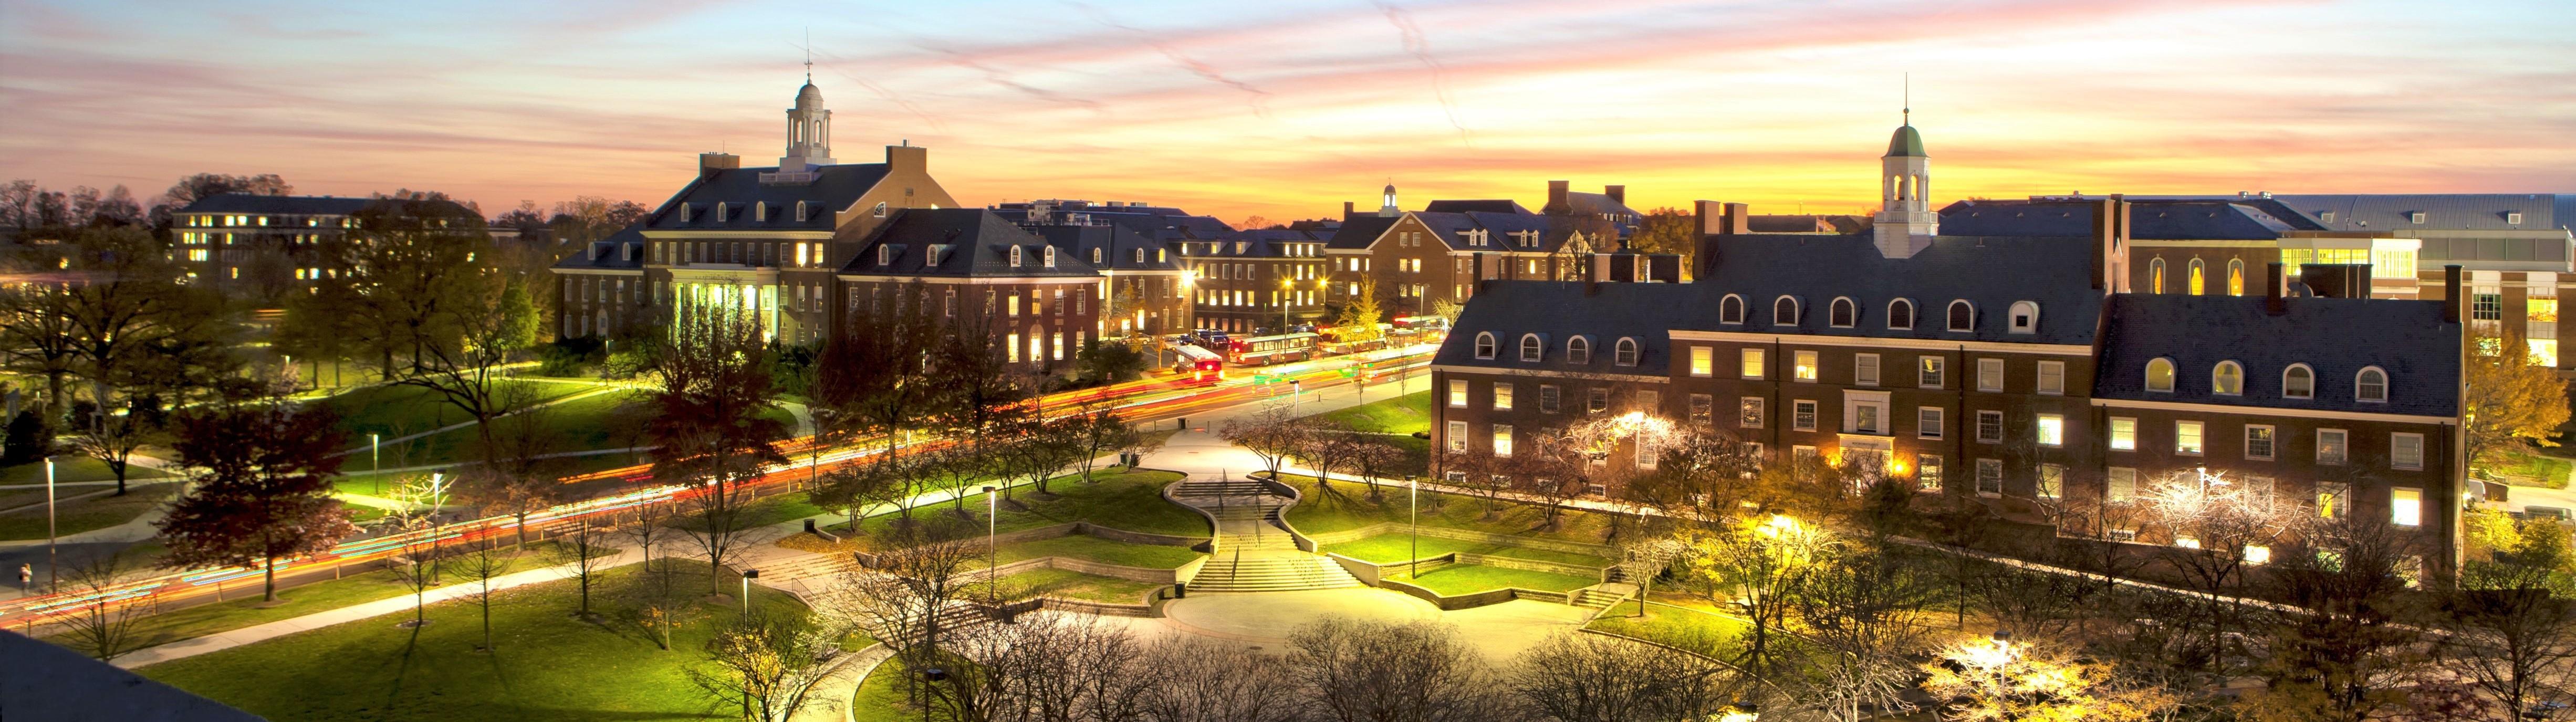 Photograph of UMD campus at dusk.